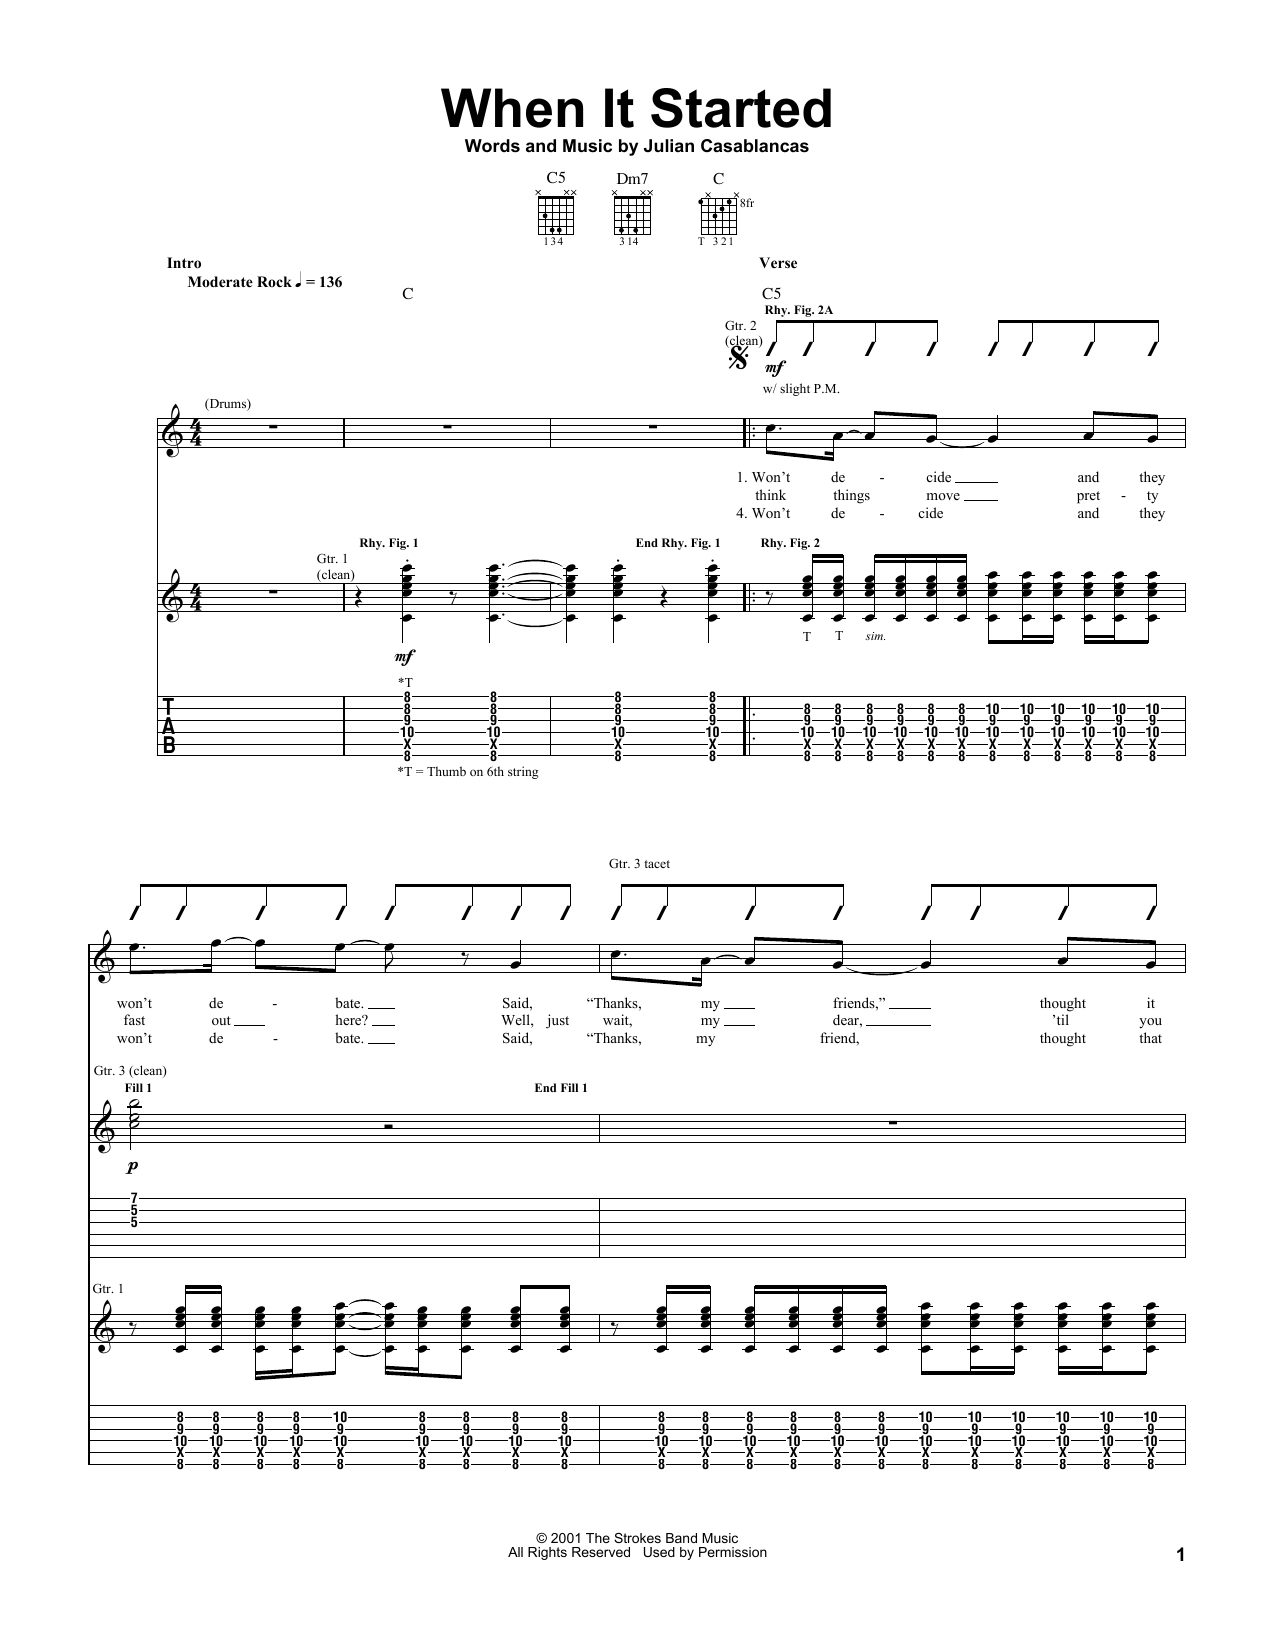 Download The Strokes When It Started Sheet Music